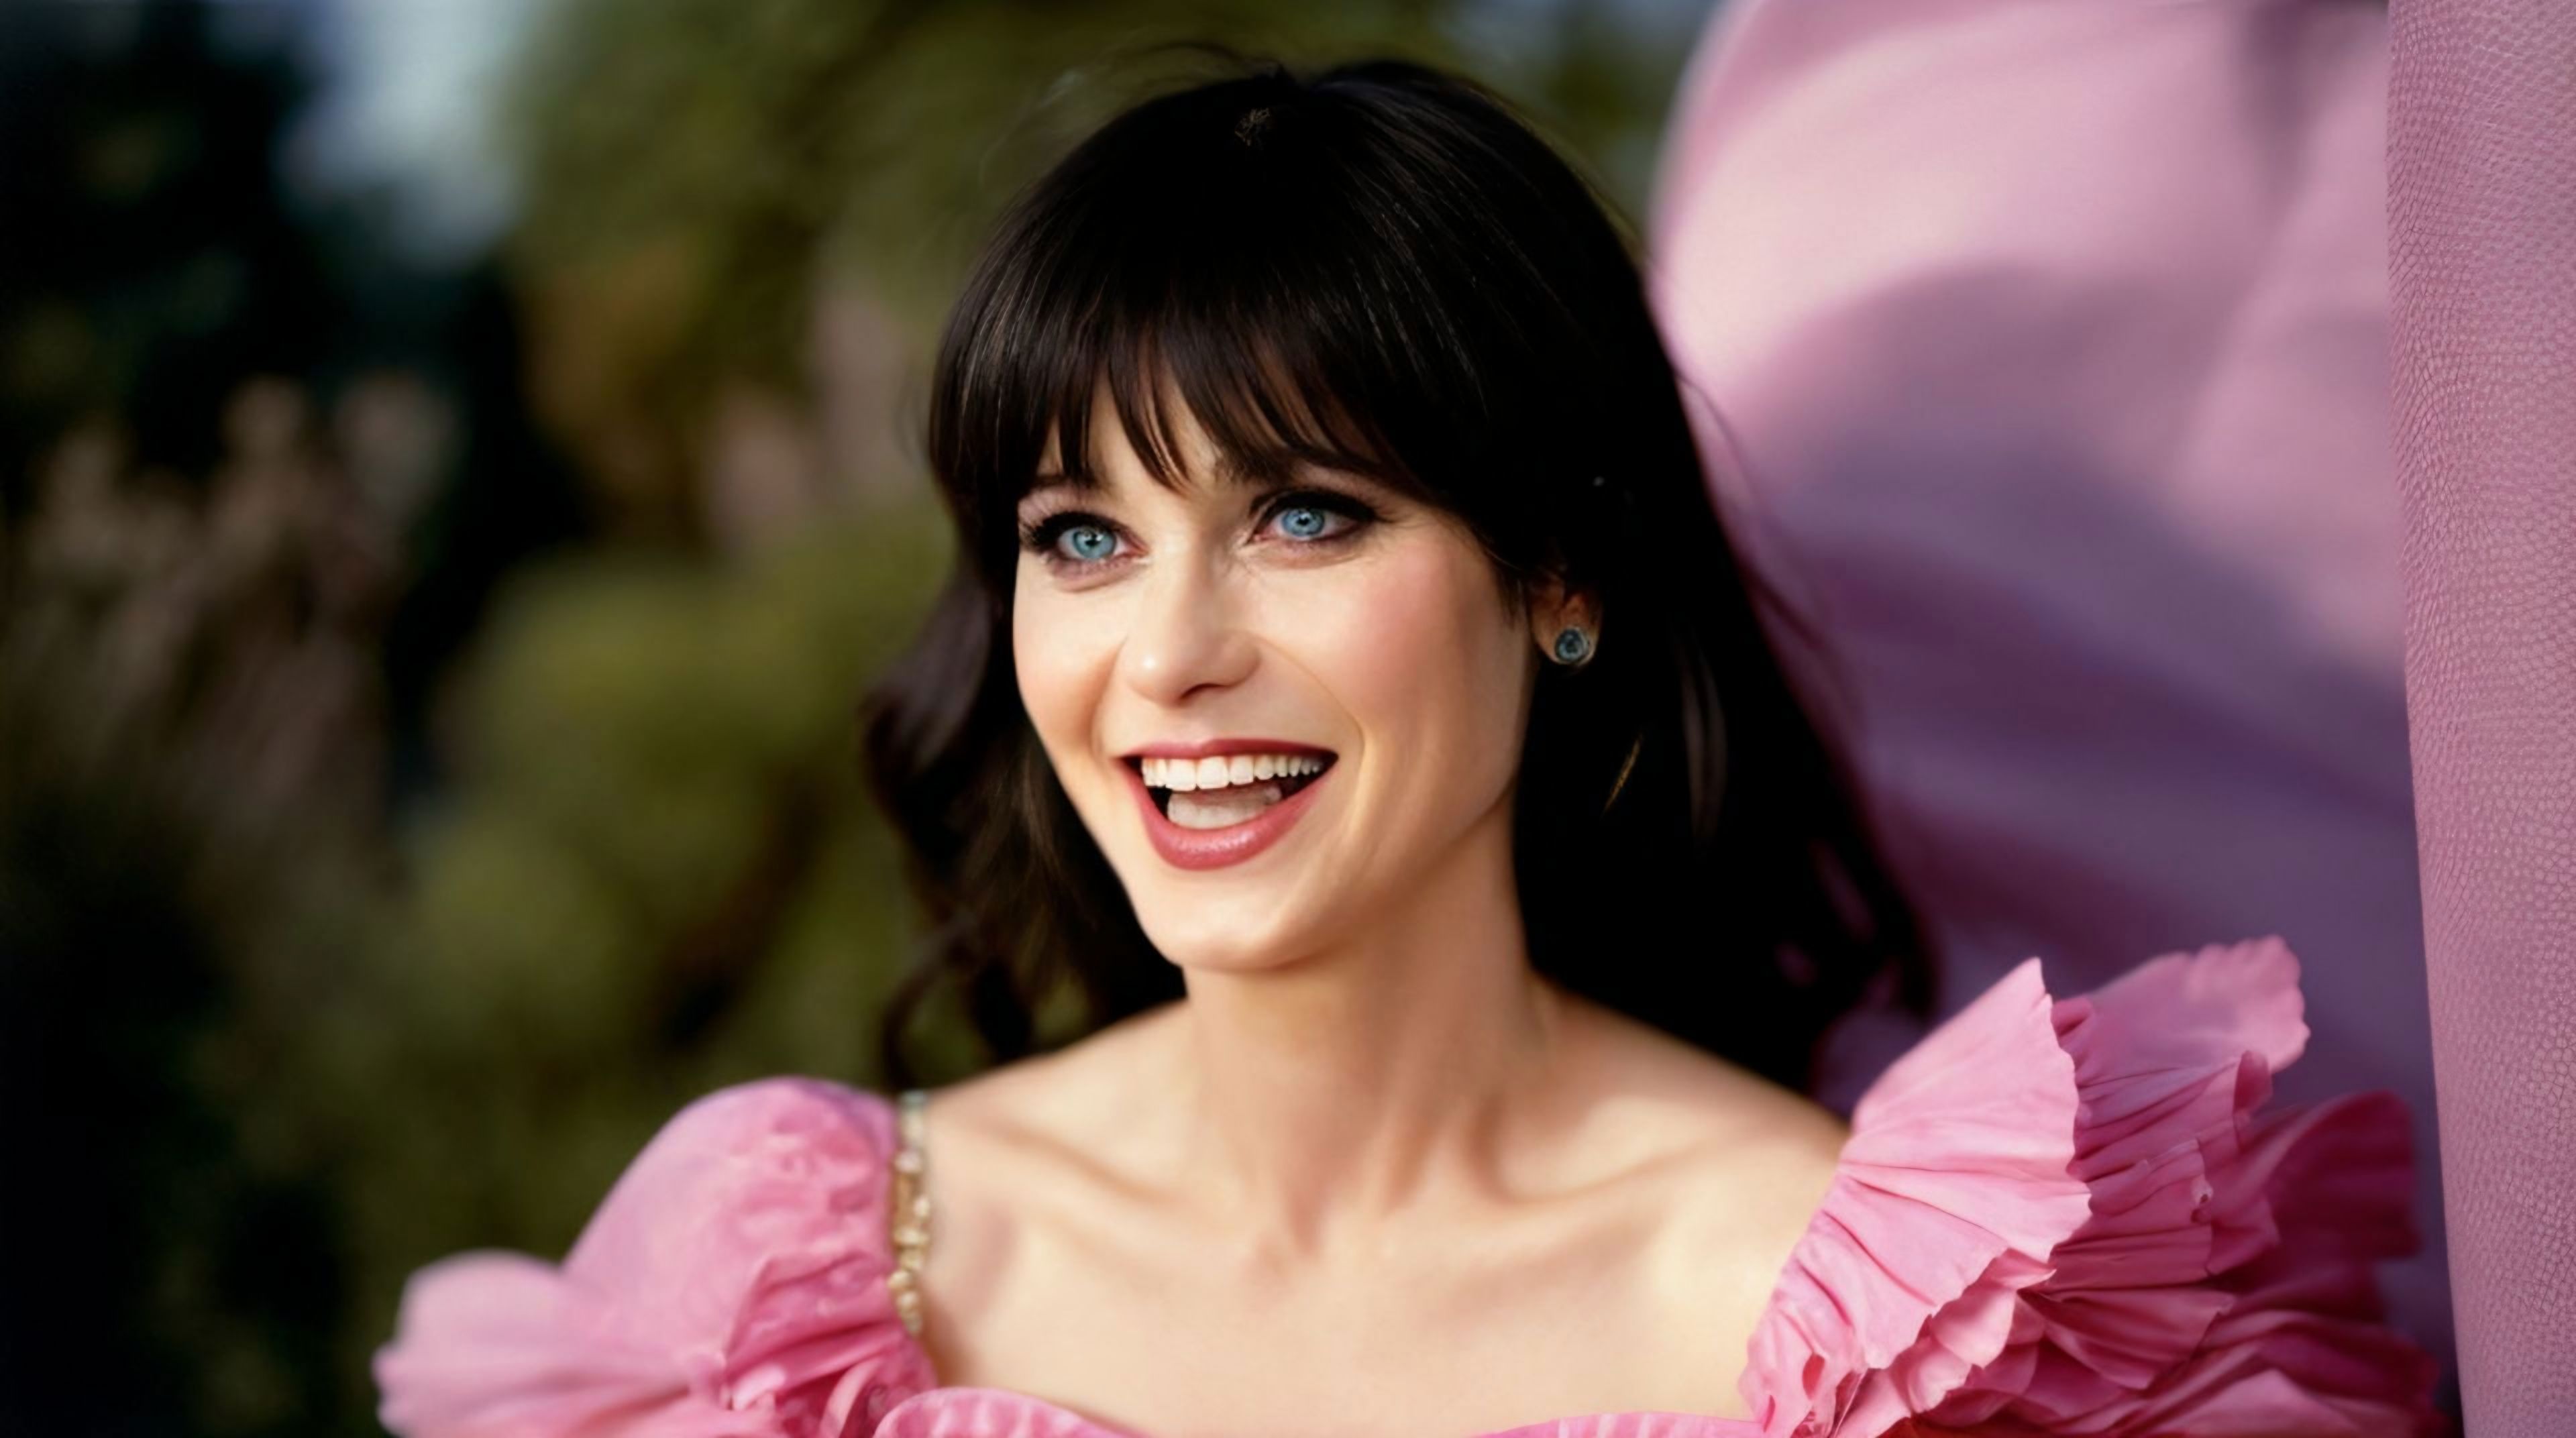 Zooey Deschanel image by TheLoraCollective